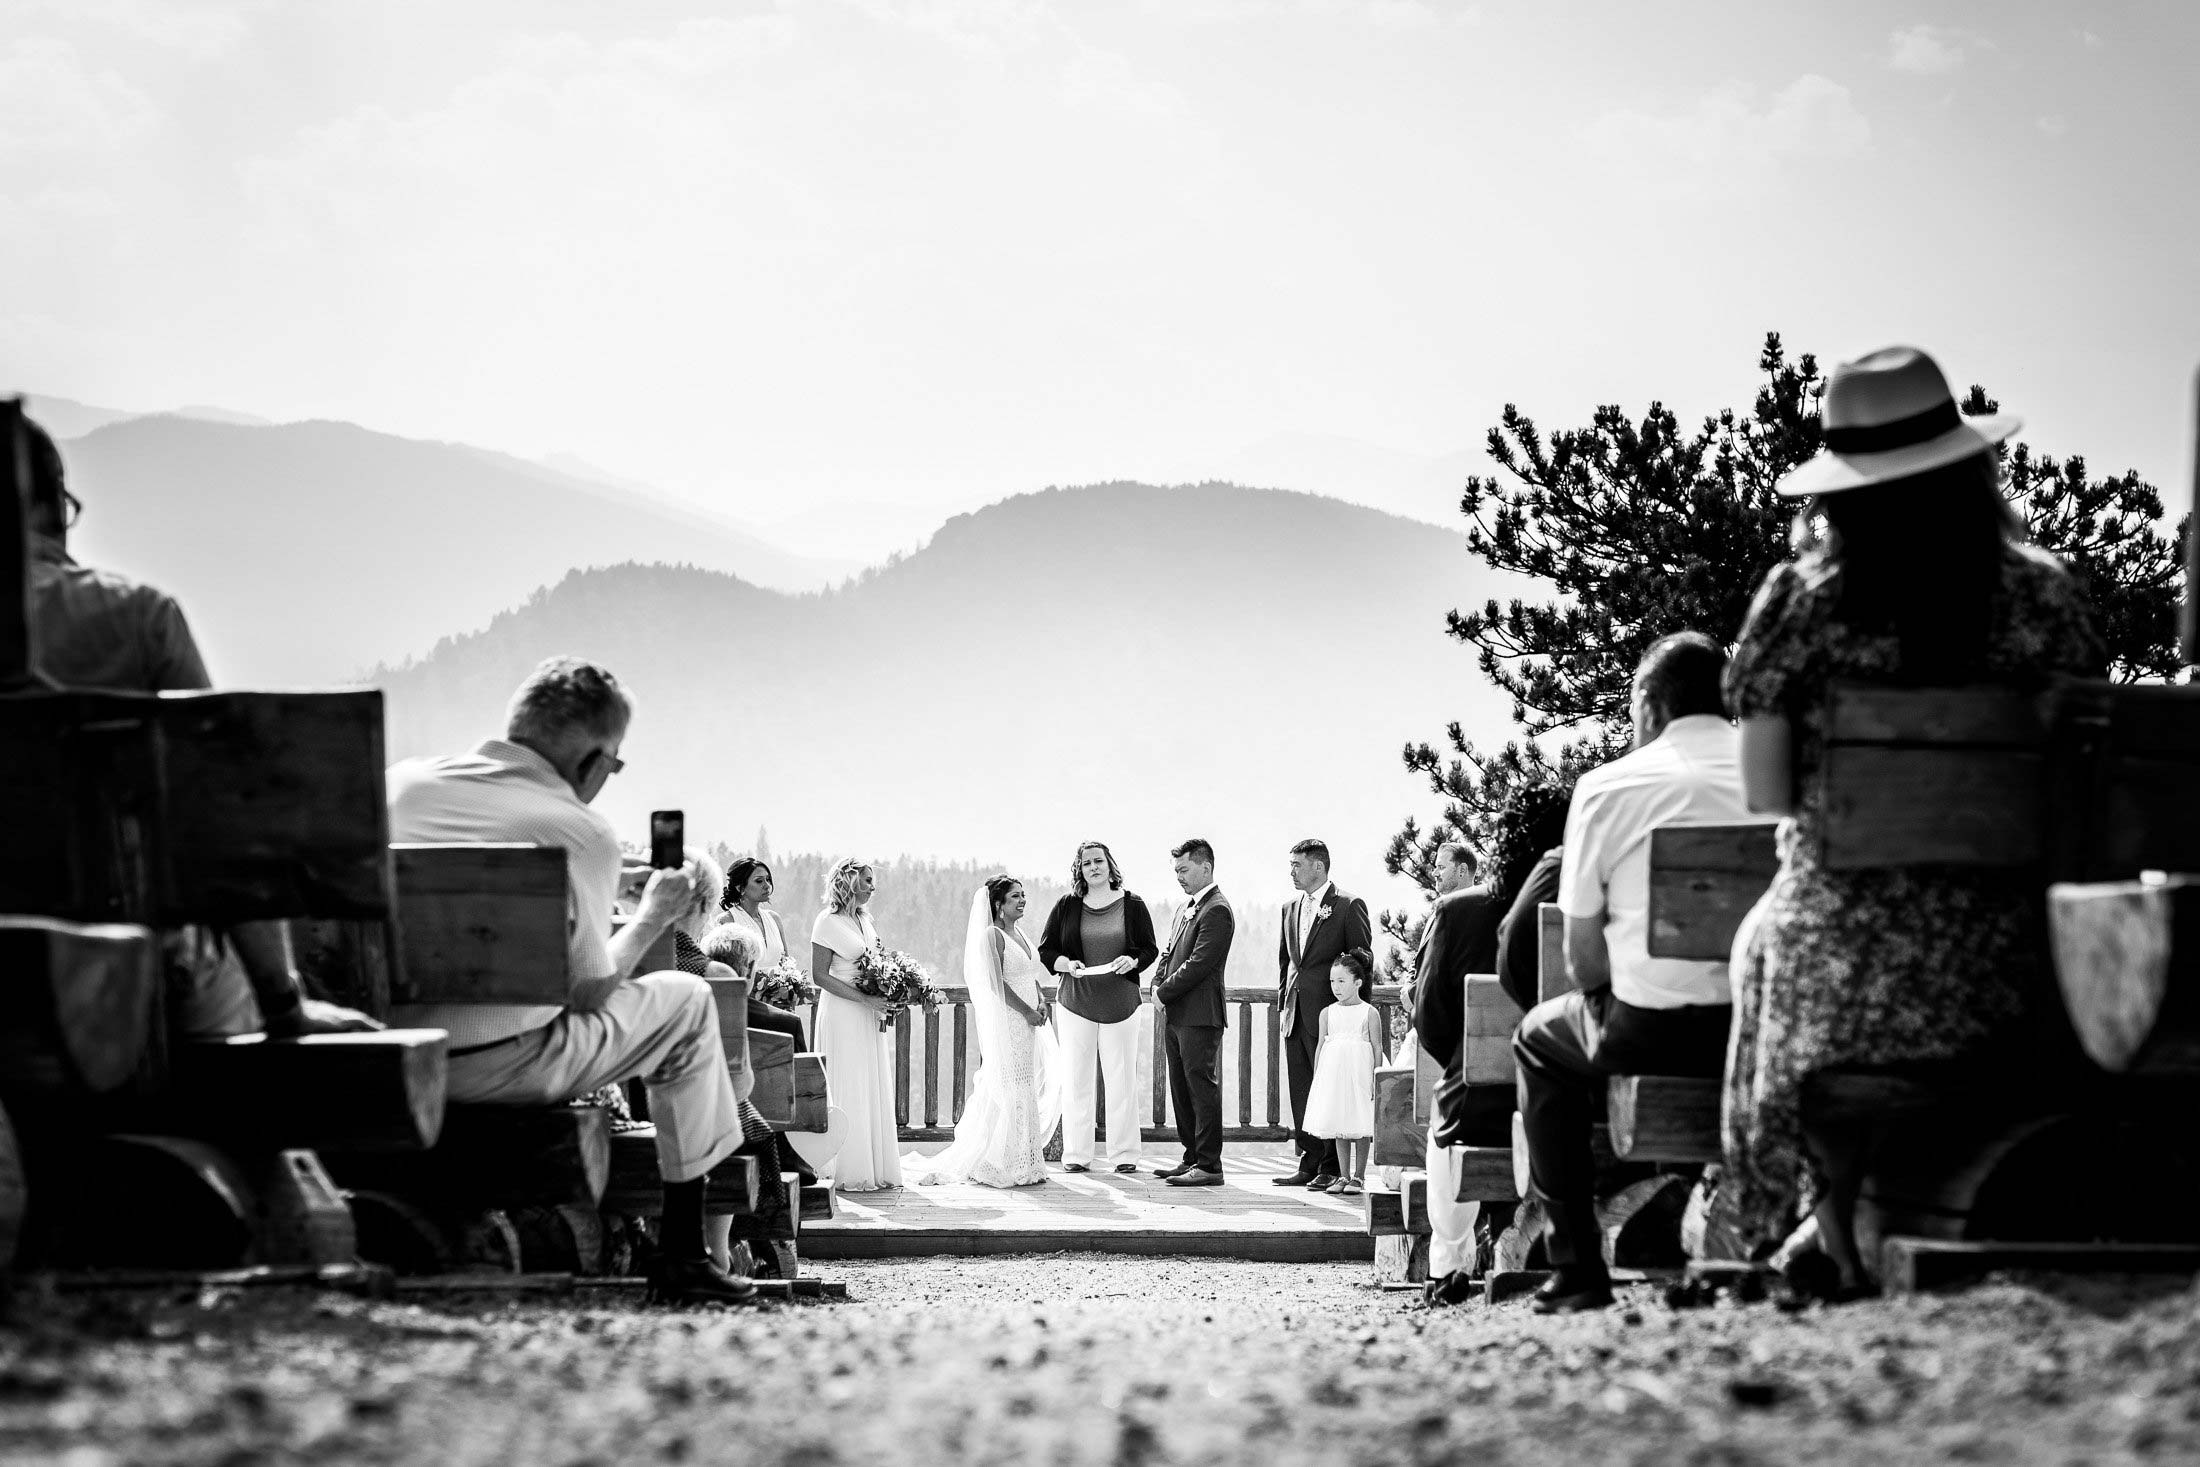 Bride and groom attend their ceremony as they stand alongside their wedding party on a wedding deck with the mountains in the background captured in black and white, wedding photos, wedding photography, wedding photographer, wedding inspiration, wedding photo inspiration, mountain wedding, YMCA of the Rockies wedding, YMCA of the Rockies wedding photos, YMCA of the Rockies wedding photography, YMCA of the Rockies wedding photographer, YMCA of the Rockies wedding inspiration, YMCA of the Rockies wedding venue, Estes Park wedding, Estes Park wedding photos, Estes Park wedding photography, Estes Park wedding photographer, Colorado wedding, Colorado wedding photos, Colorado wedding photography, Colorado wedding photographer, Colorado mountain wedding, Colorado wedding inspiration